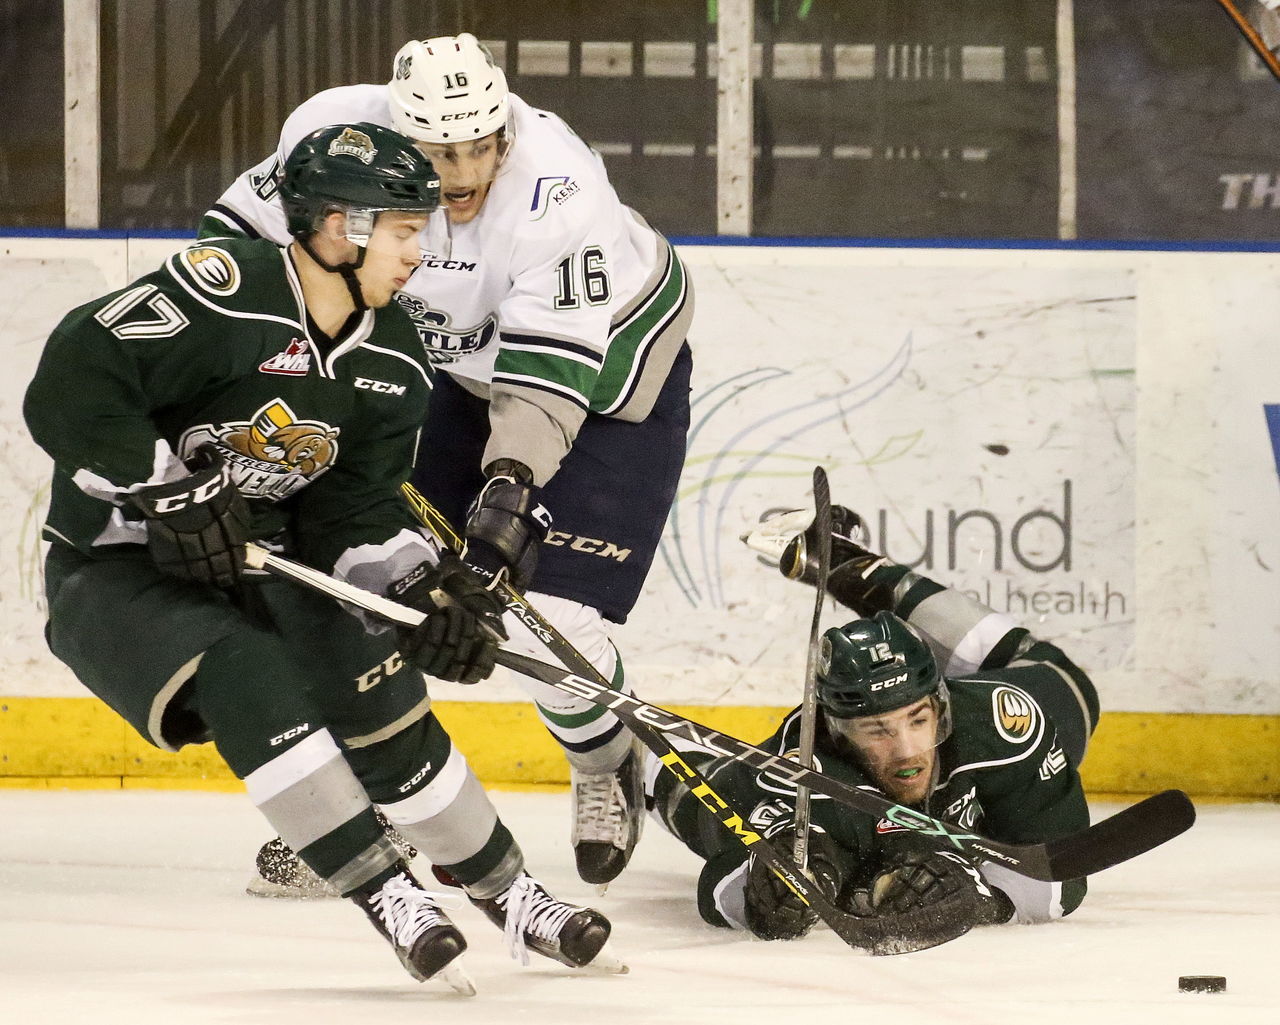 The Silvertips’ Matt Fonteyne (left) and Dawson Leedahl (right) battle for the puck with the Thunderbirds’ Alexander True during a playoff game Sunday afternoon at the ShoWare Center in Kent.